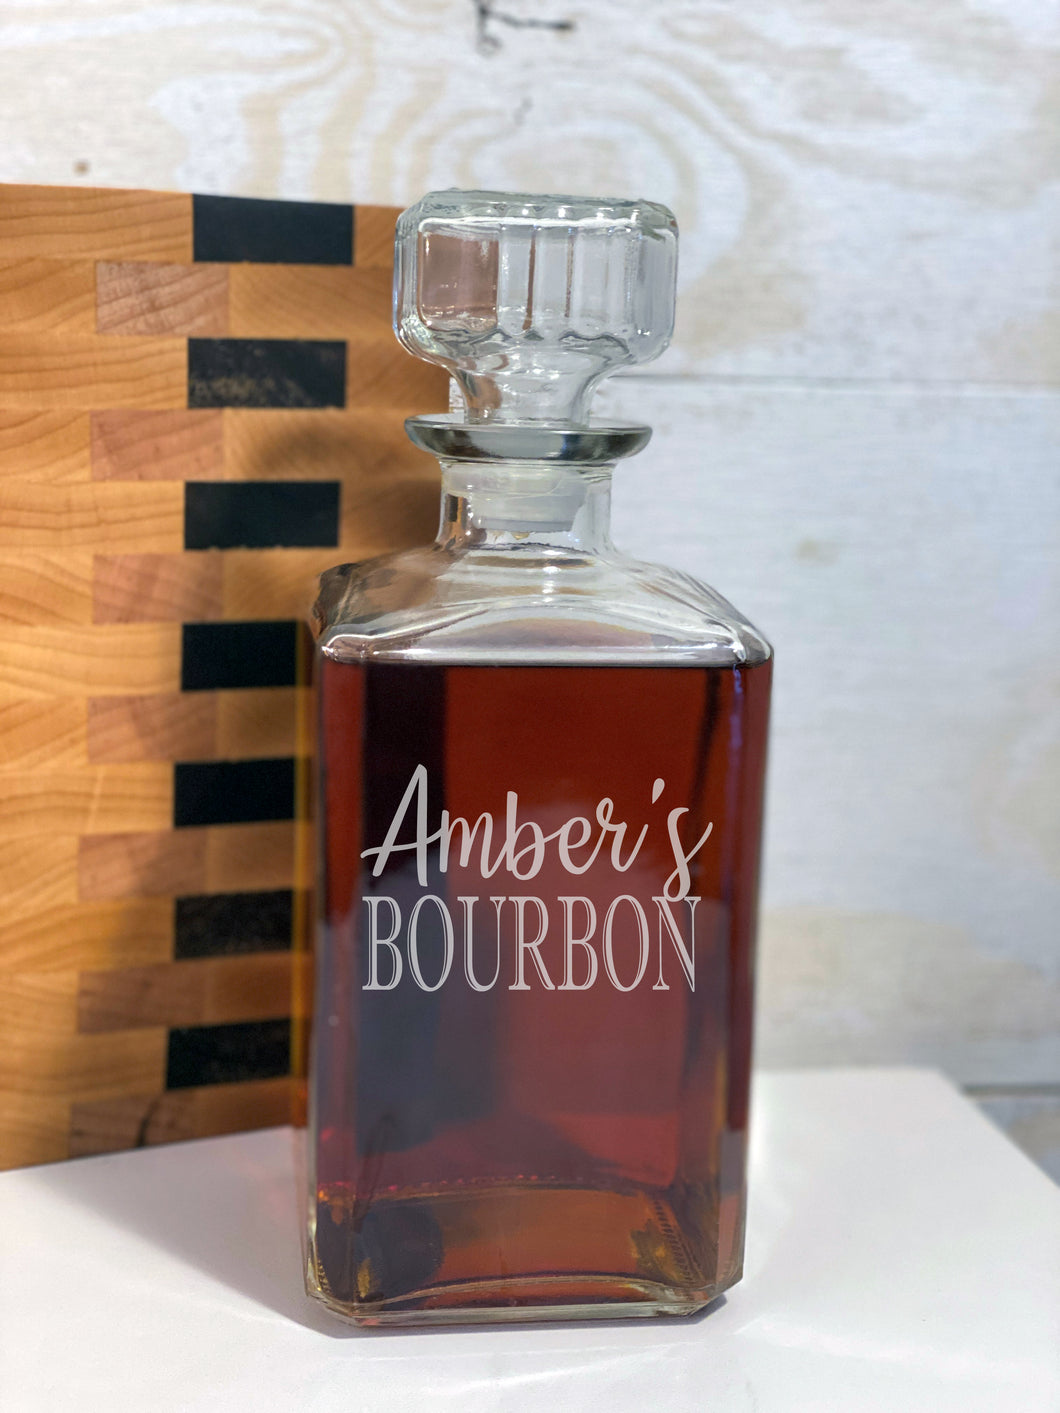 Personalized Engraved Liquor Decanter